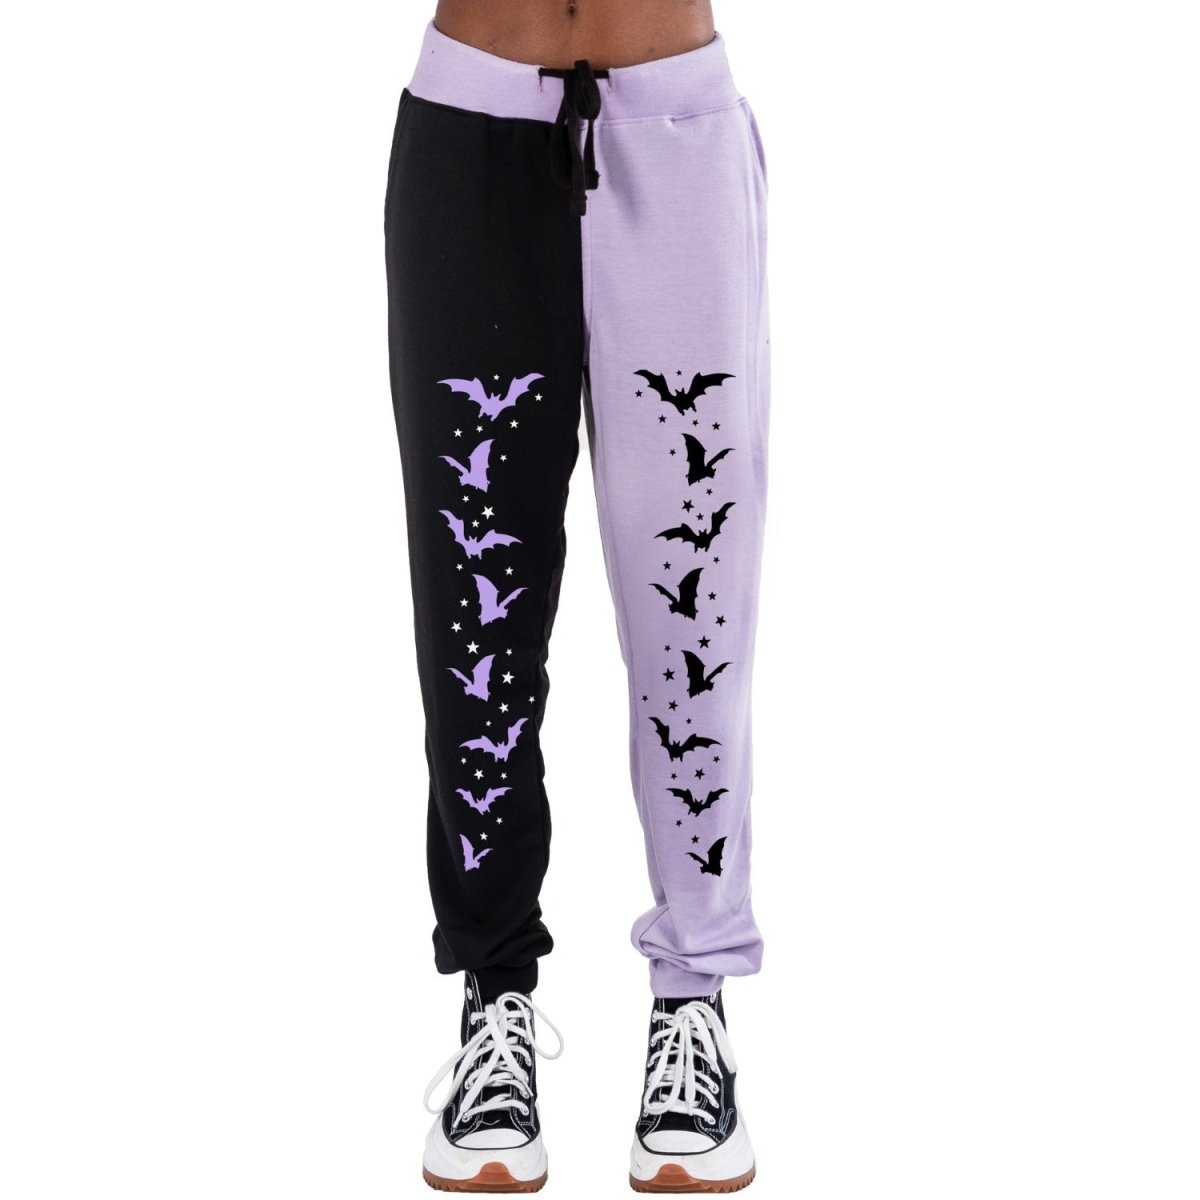 Too Fast | Stars and Bats Two Tone Purple and Black Sweatpants